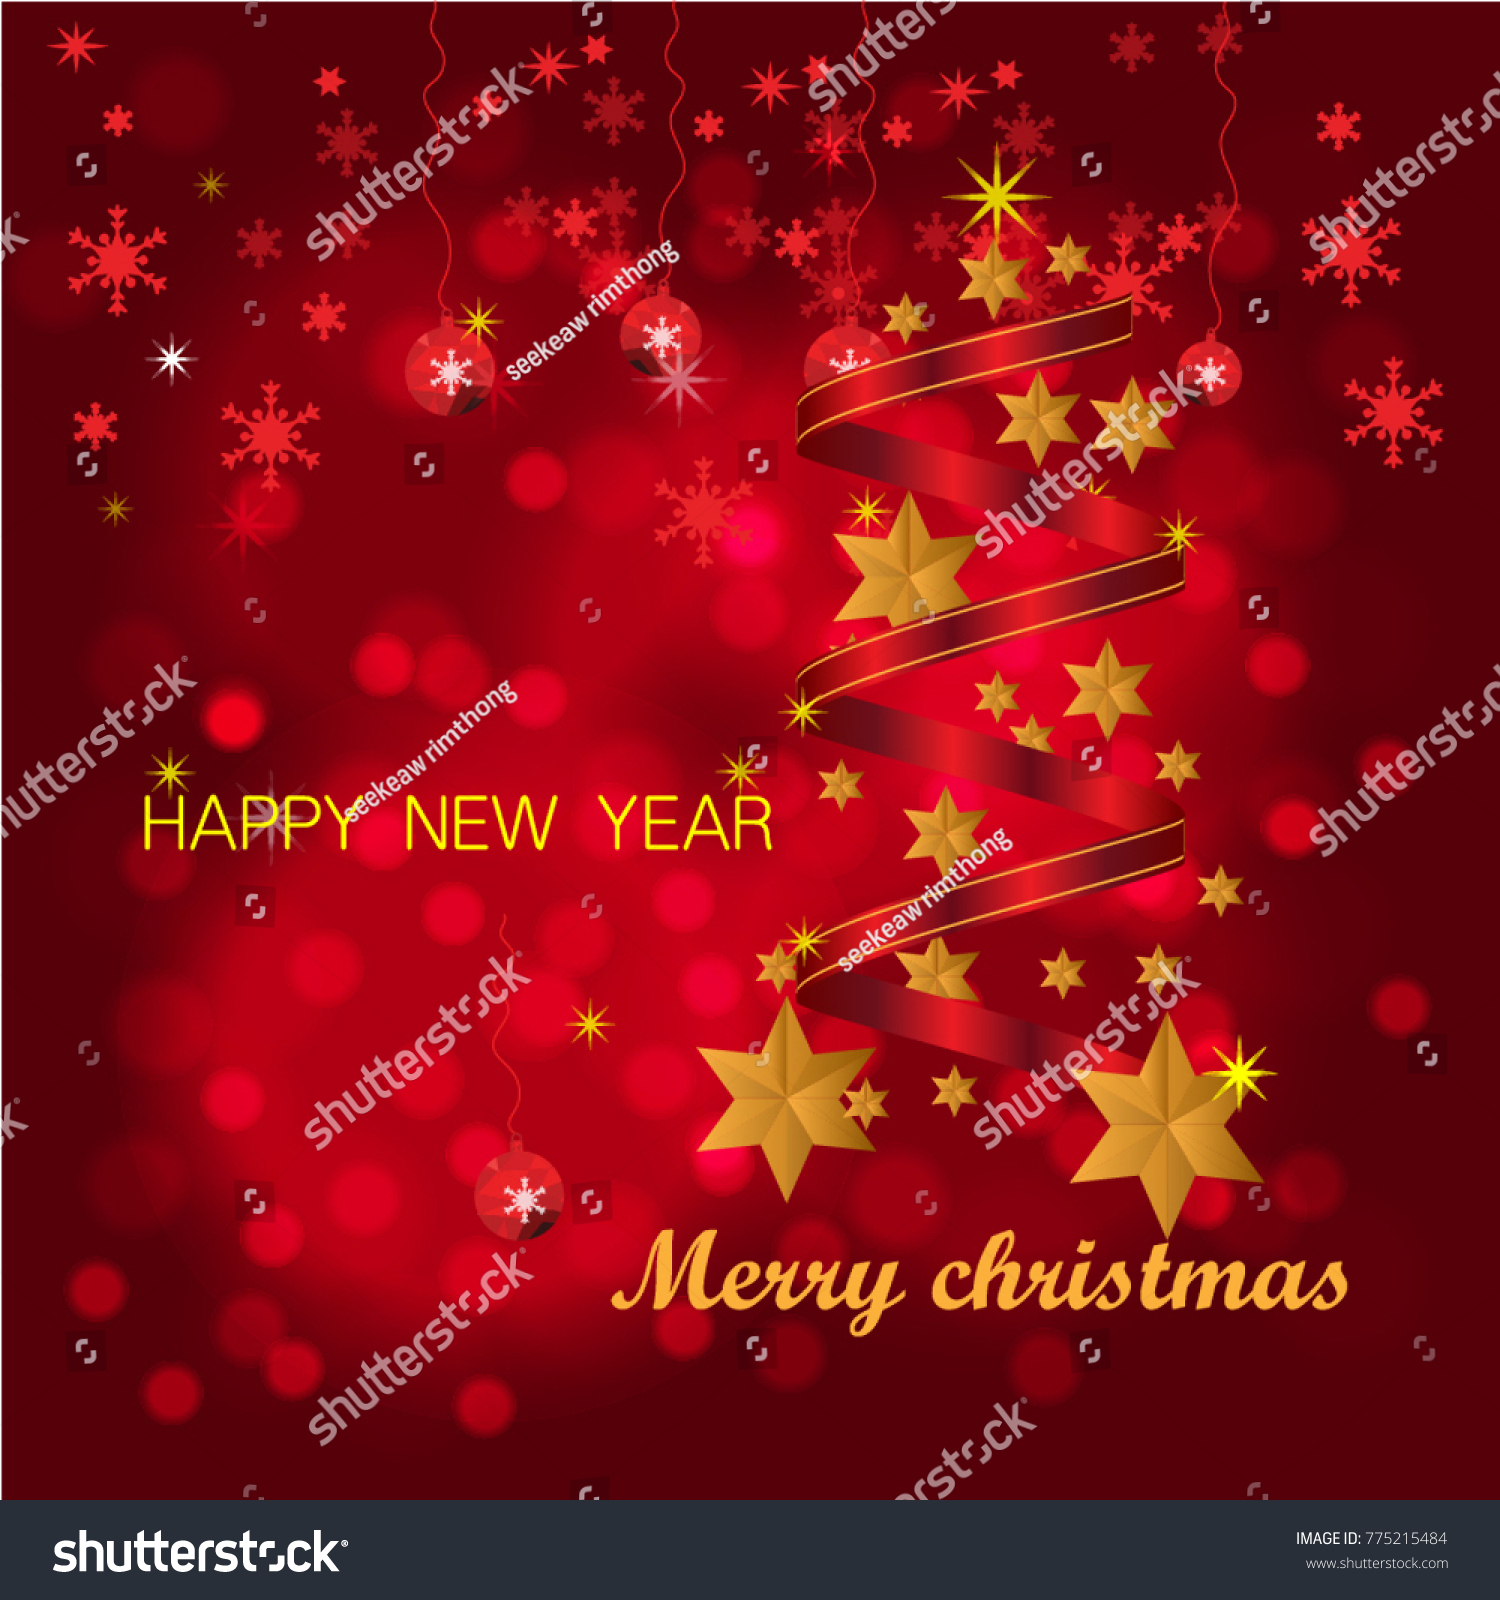 Christmas design Vector.Merry Christmas and happy new year #775215484